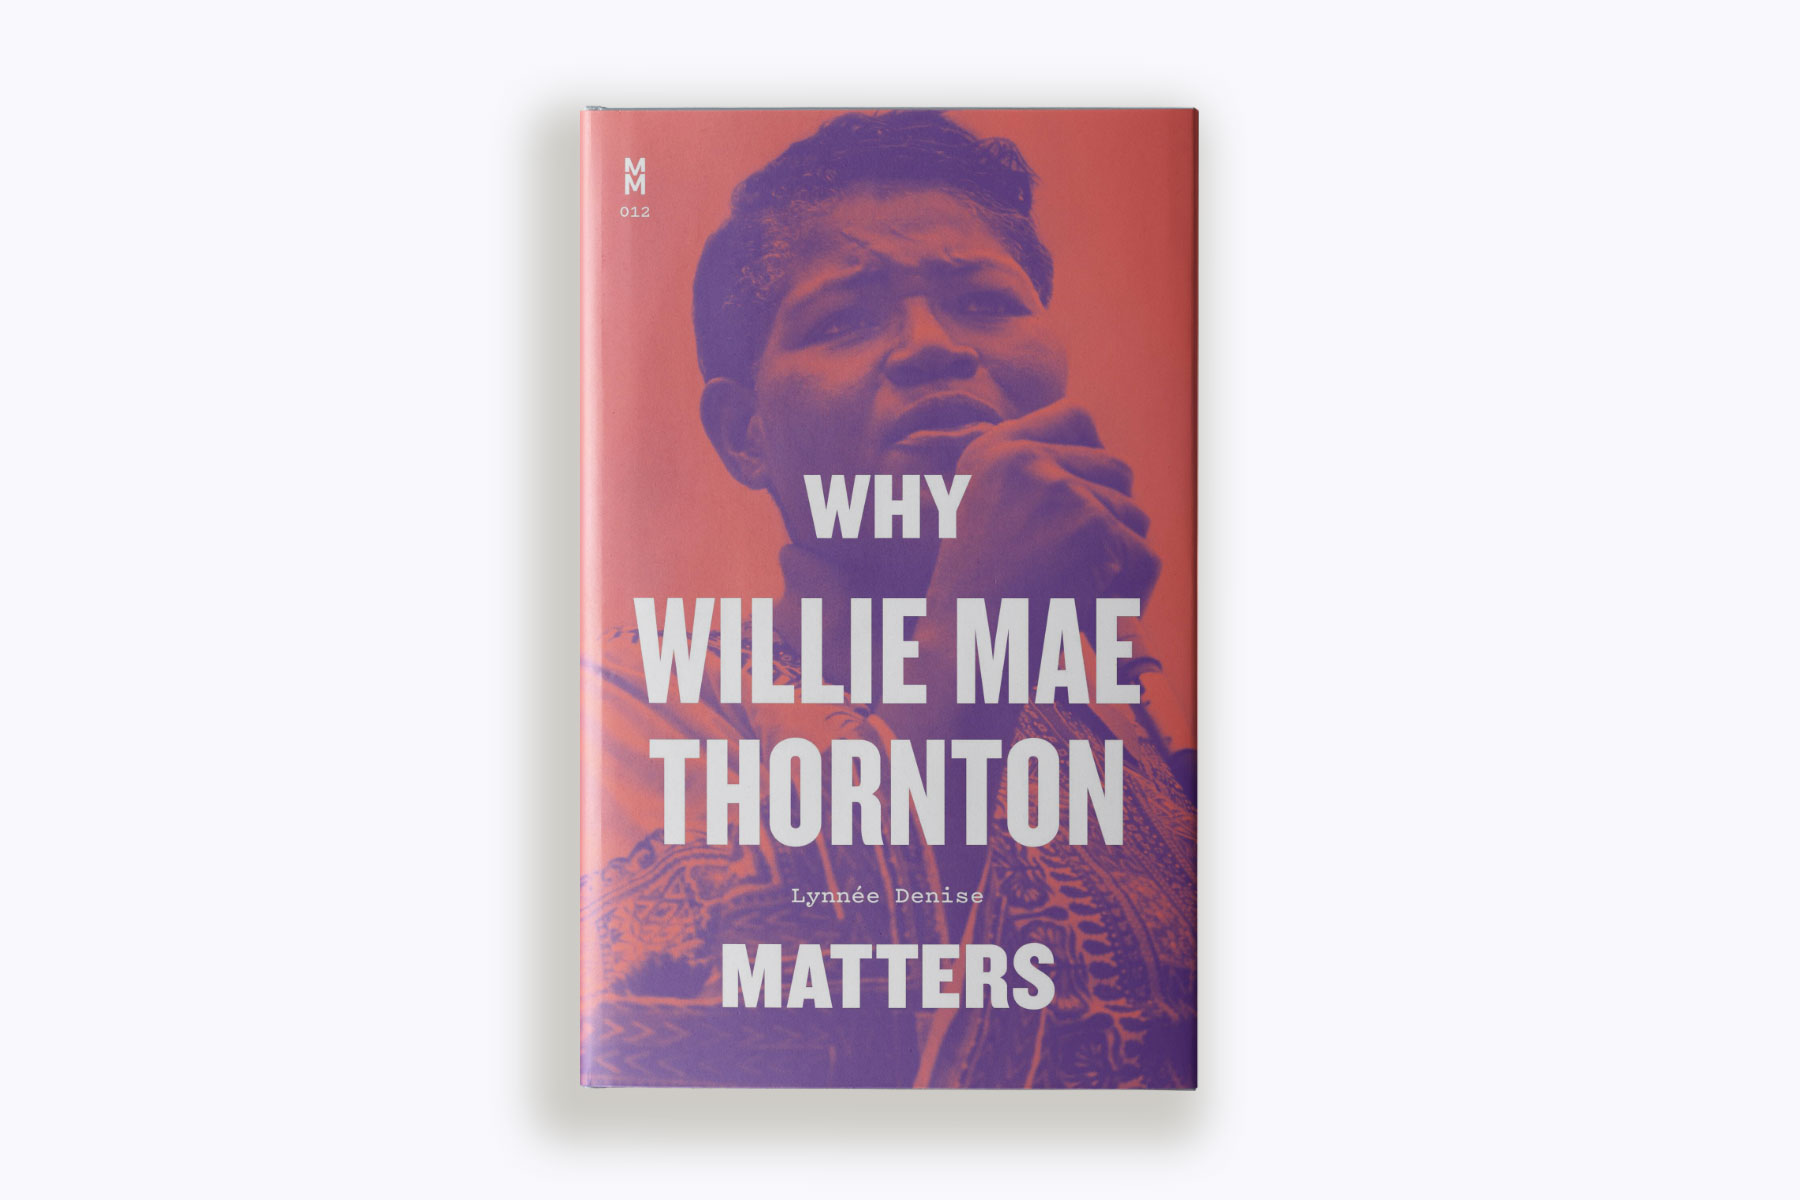 Lynnée Denise's book "Why Willie Mae Thornton Matters"